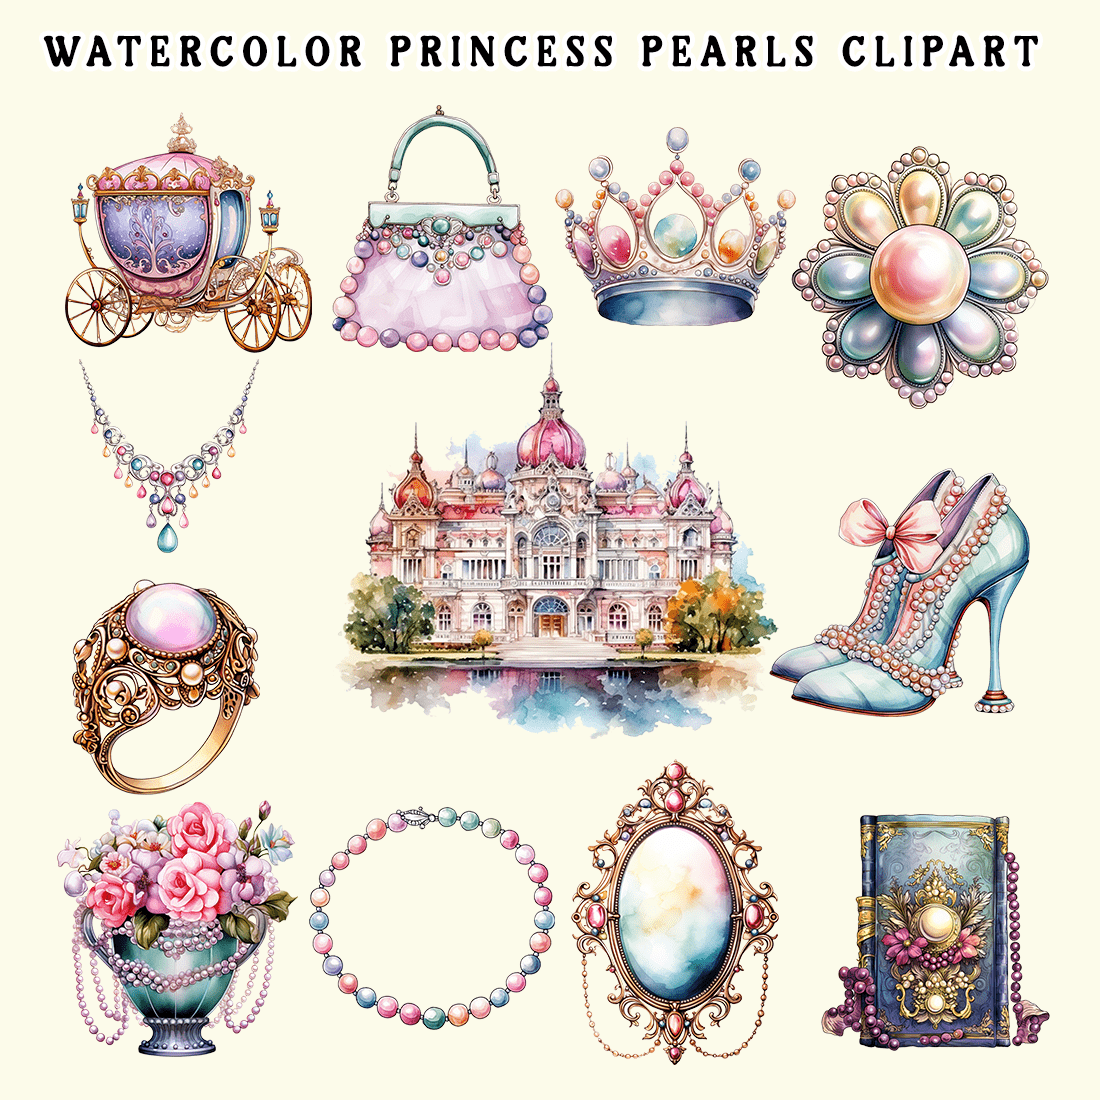 Watercolor Princess Pearls Clipart preview image.